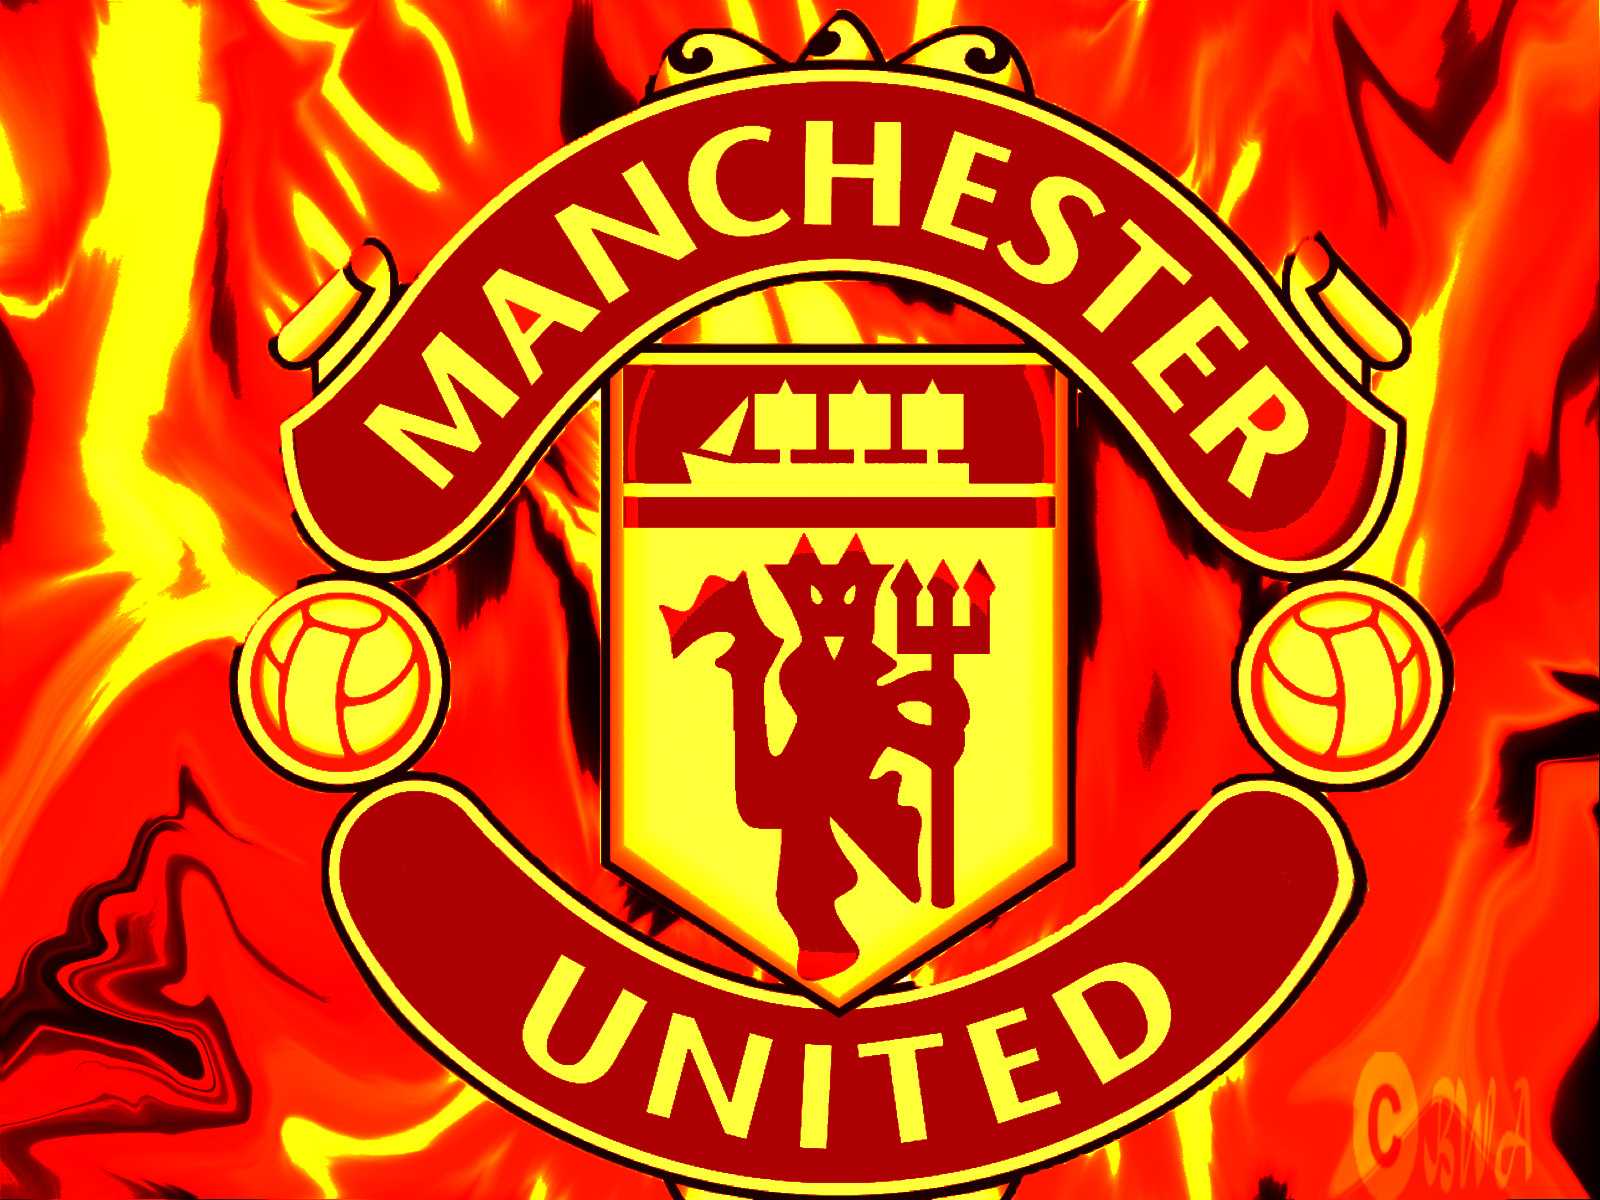 All About Manchester United FC We Are United GGMU East 1878